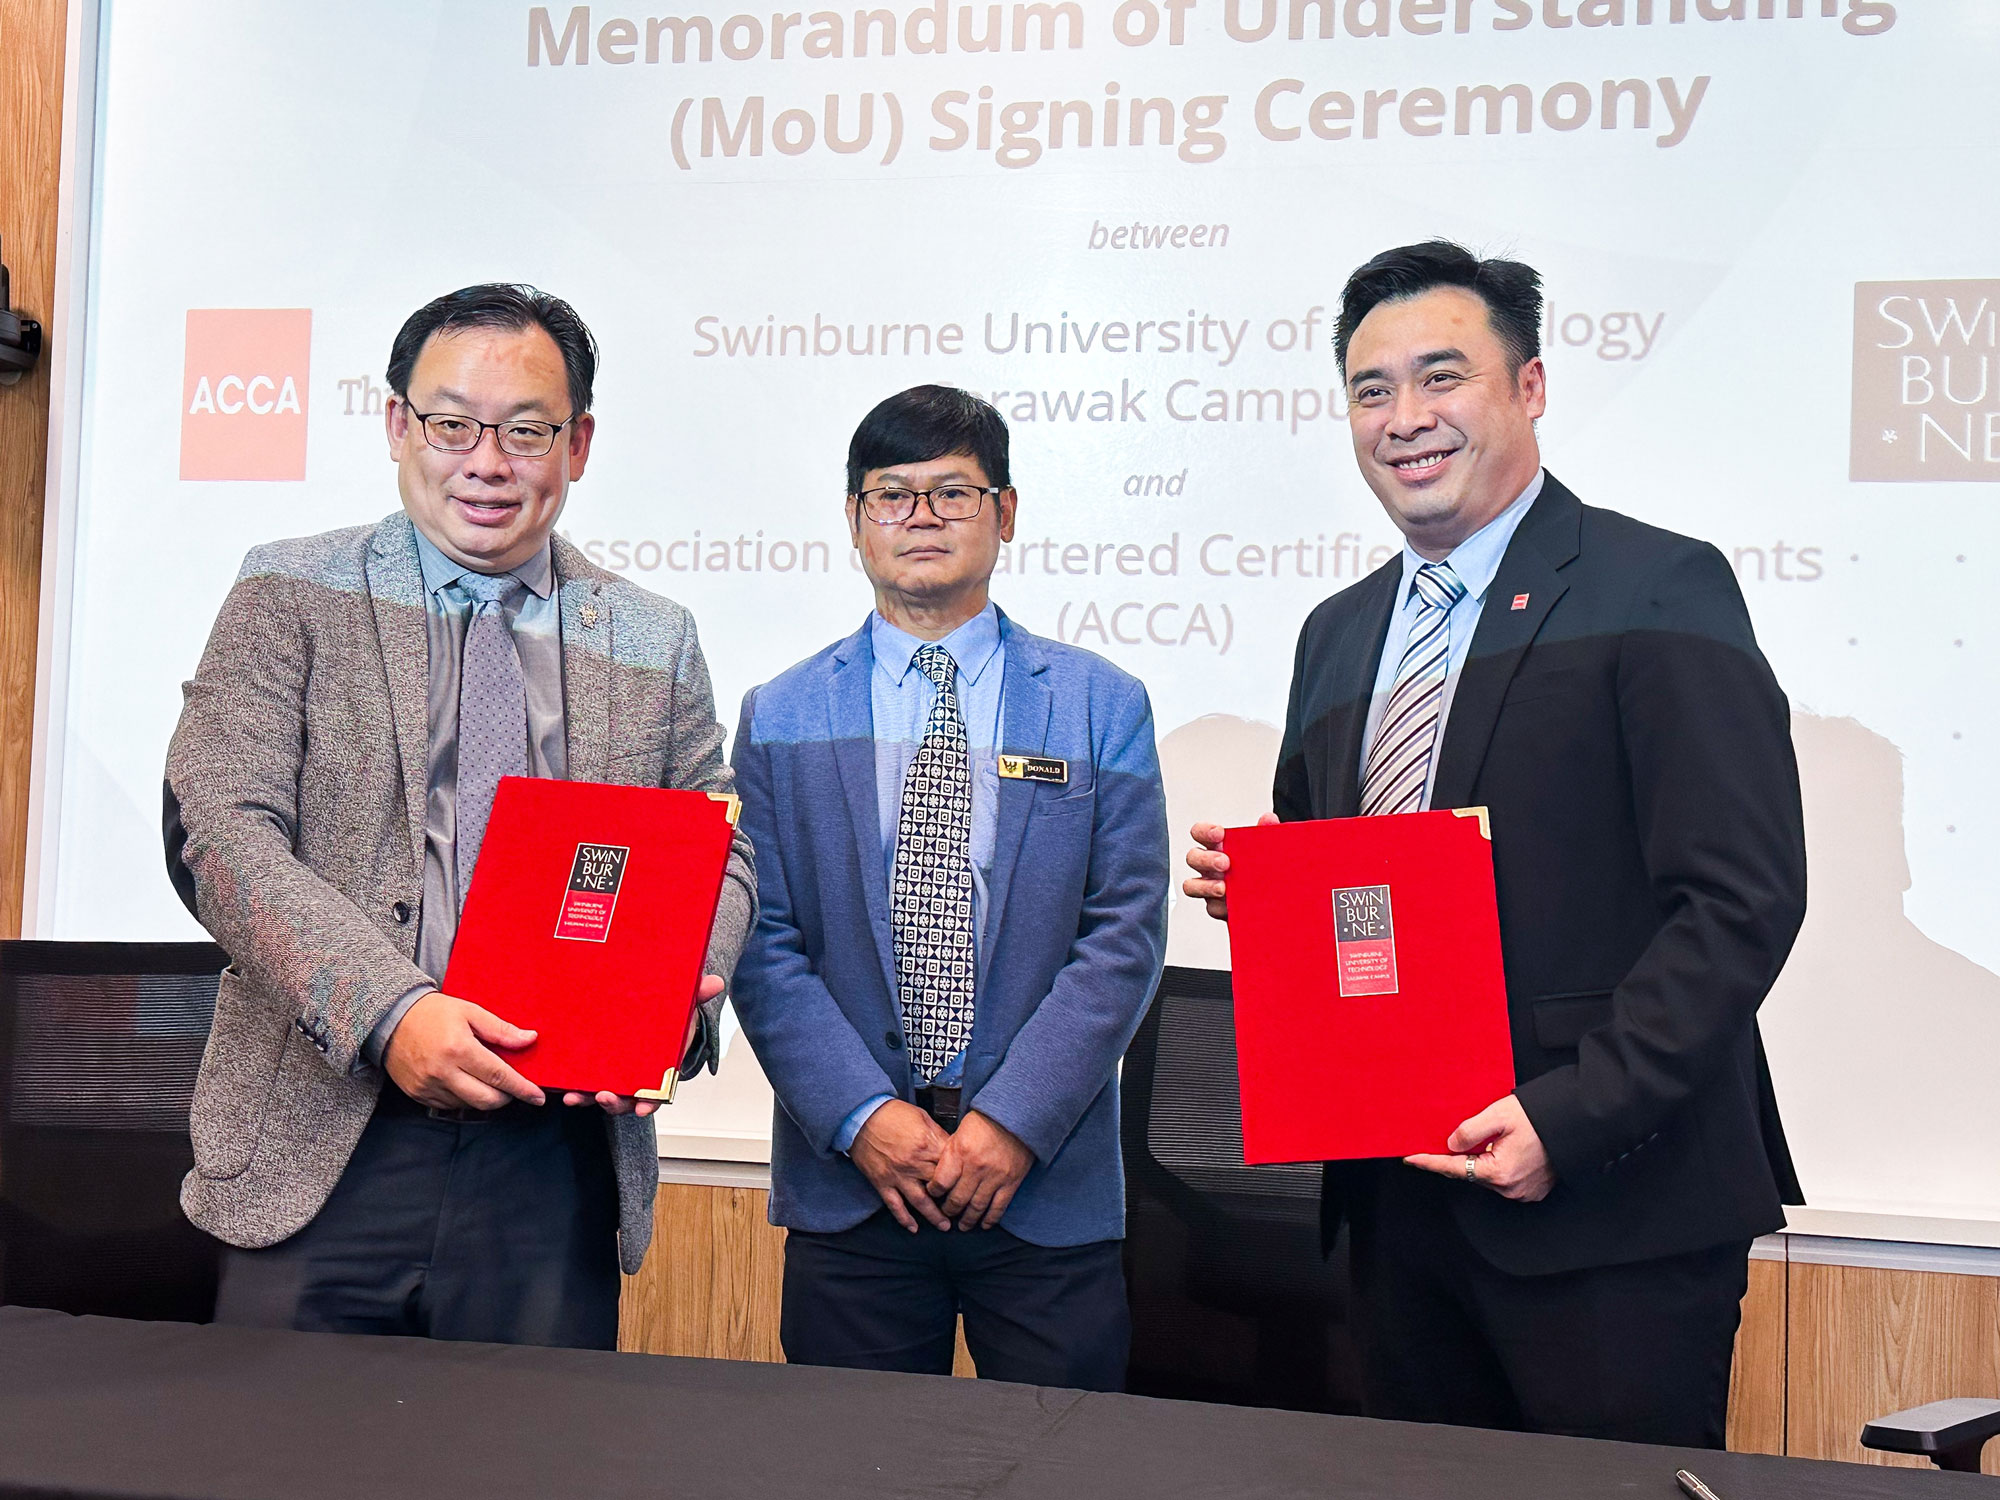 Ir Professor Lau Hieng Ho (left) and Mr Andrew Lim (right) show the signed documents as Mr Donald Henry Nohed looks on.